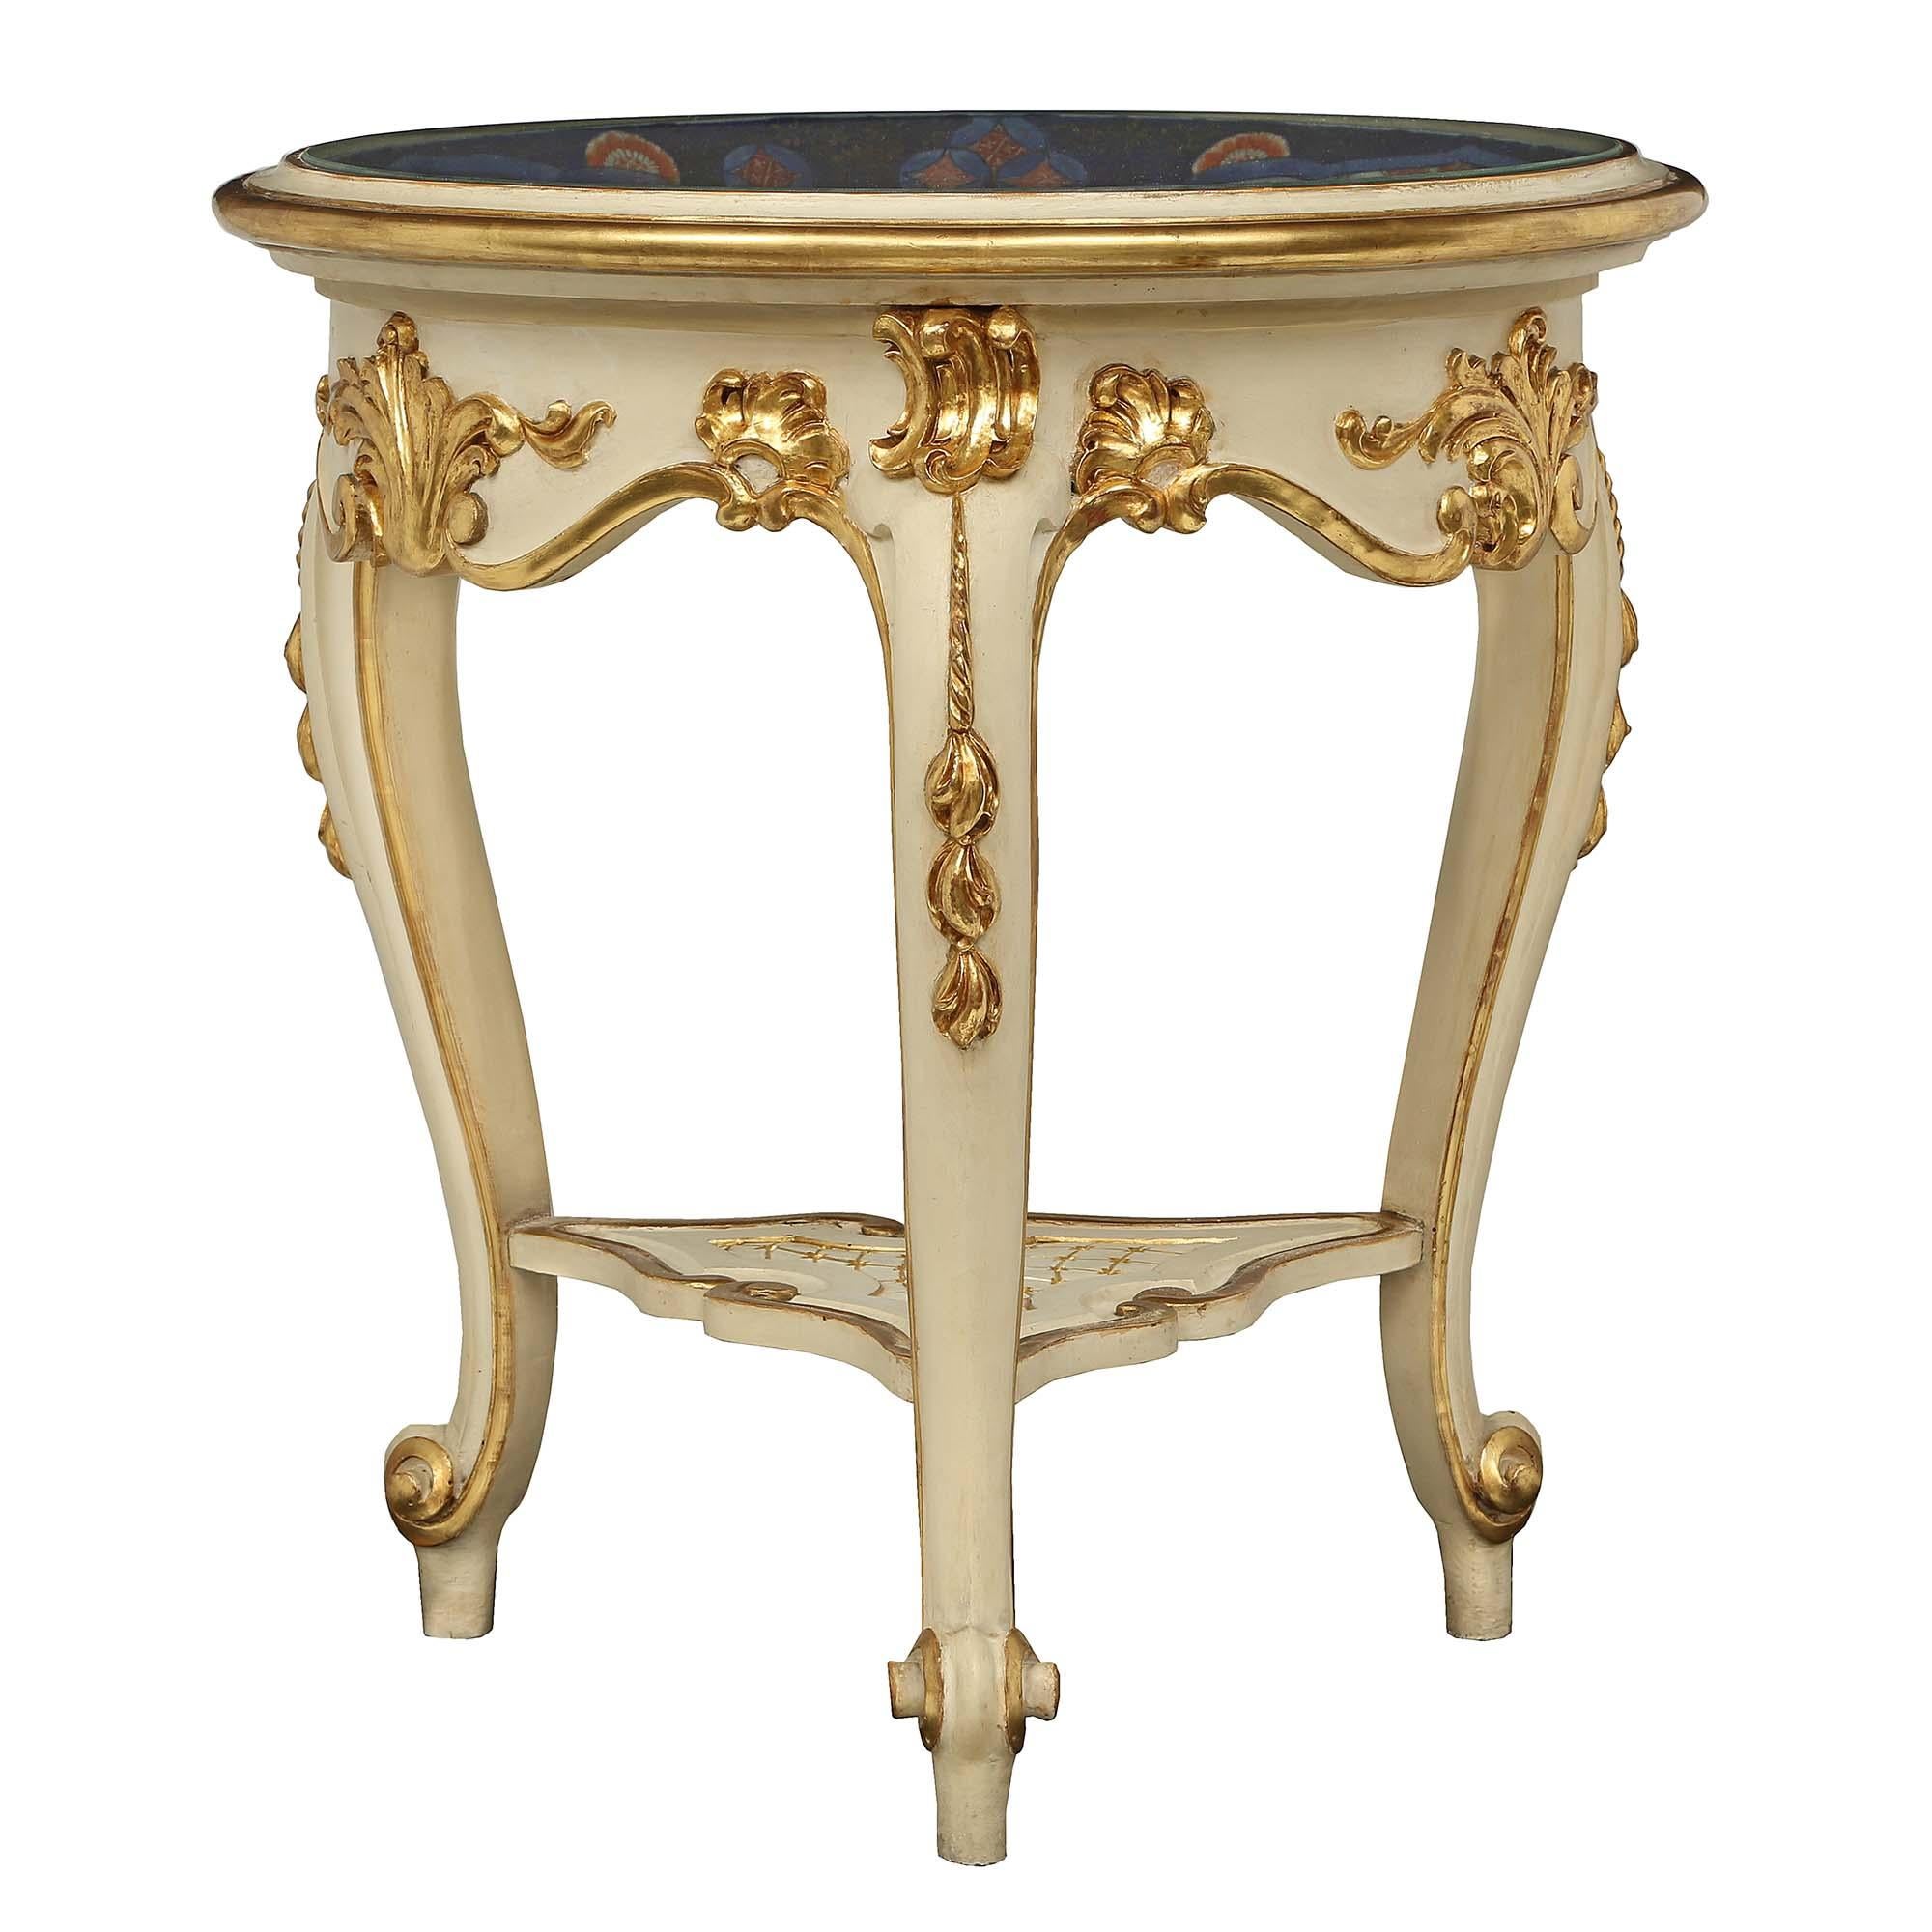 A unique and most decorative side table with an 18th century Imari bowl fitted in its original Italian 19th century Louis XV st. patinated and giltwood base. The table is raised by elegant cabriole legs with richly carved floral giltwood accents and